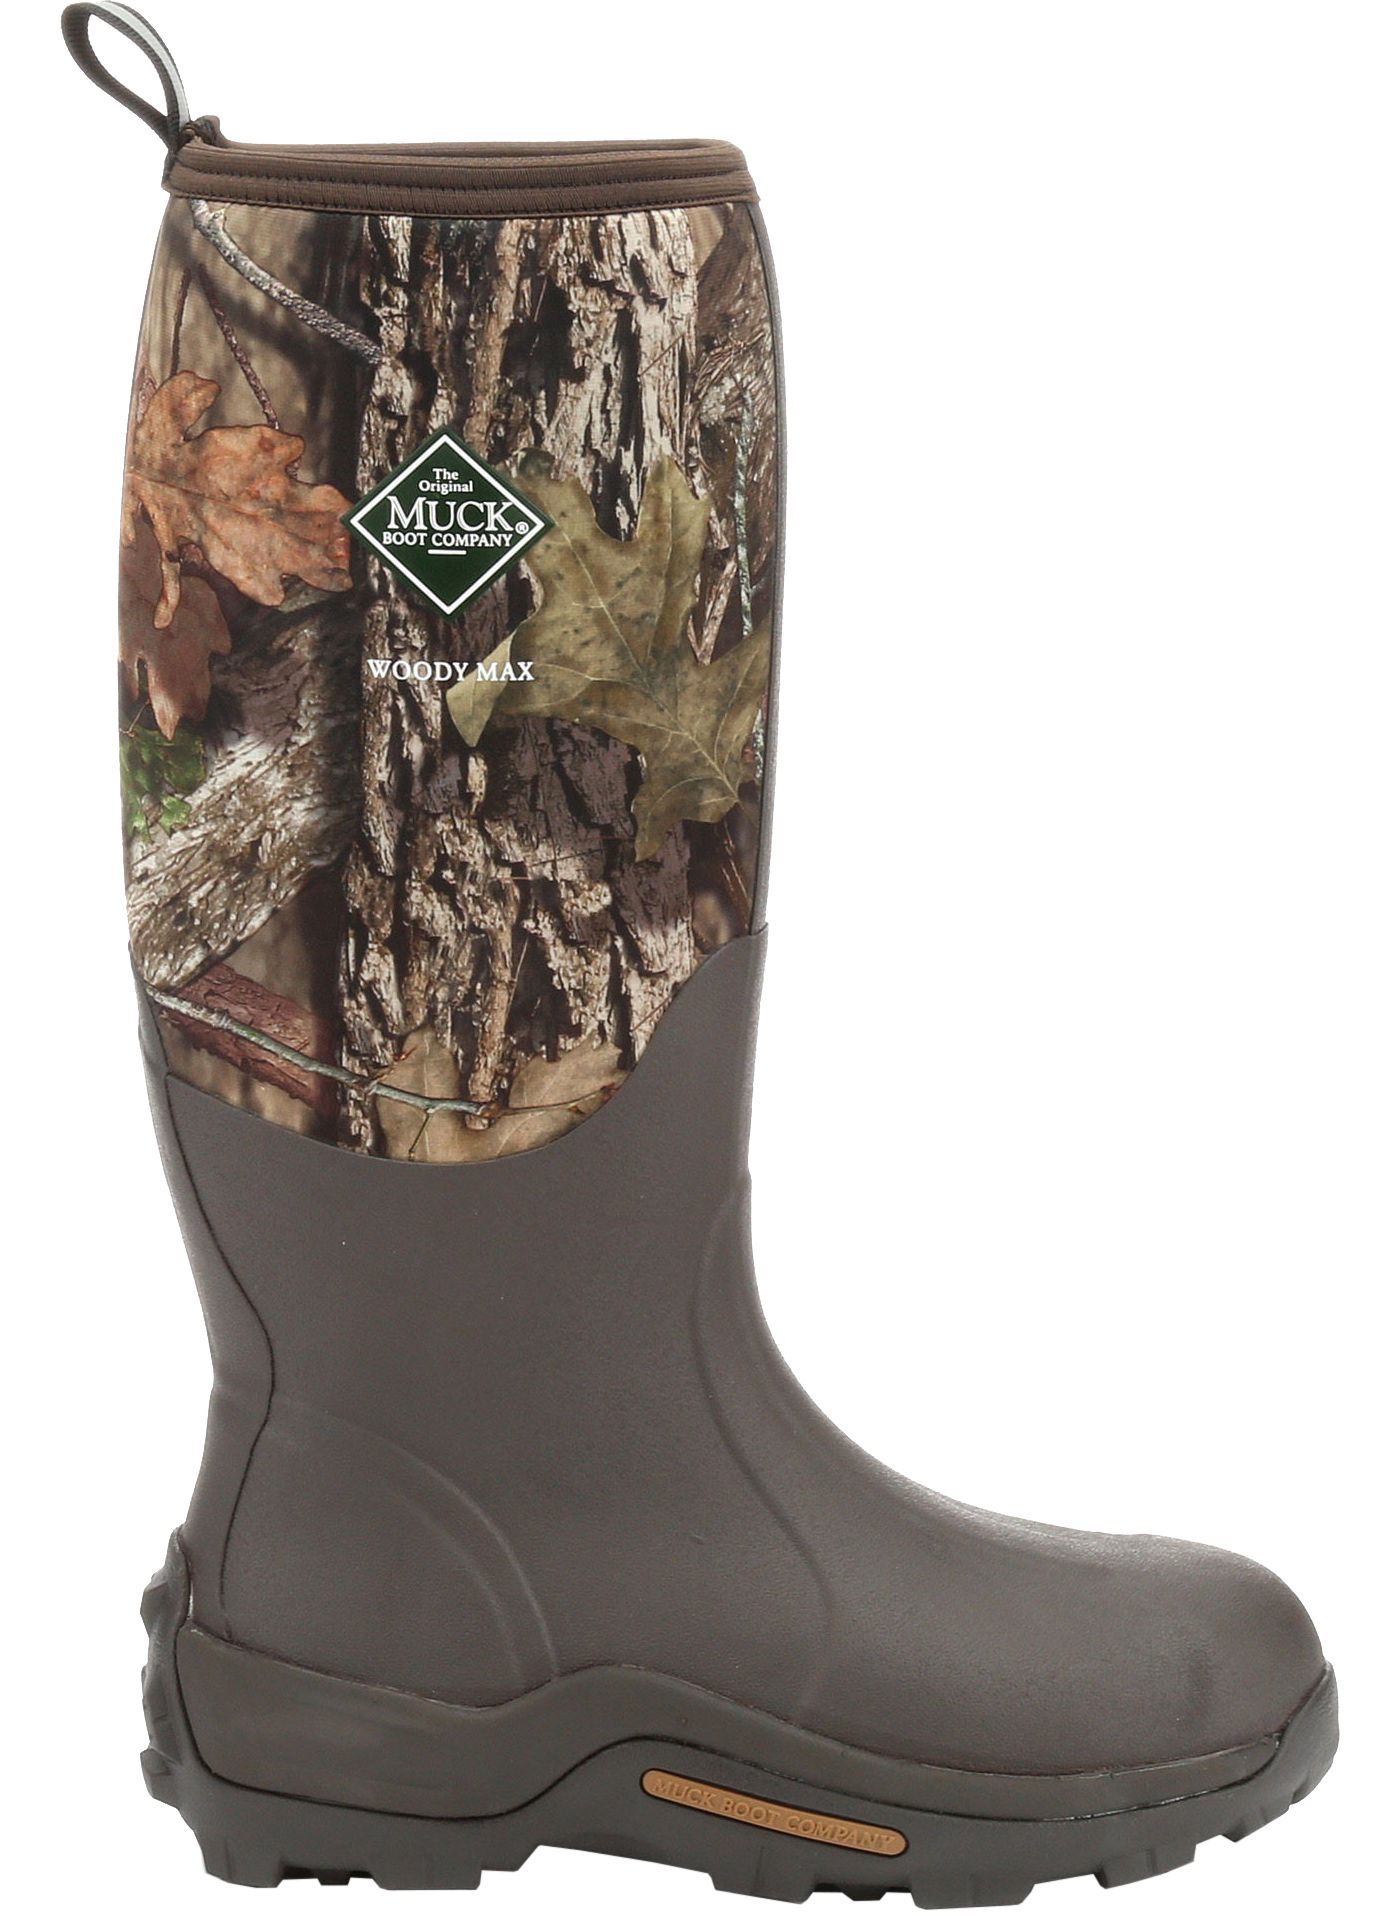 Muck Boots Men&#39;s Woody Max Insulated Rubber Hunting Boots | DICK&#39;S Sporting Goods